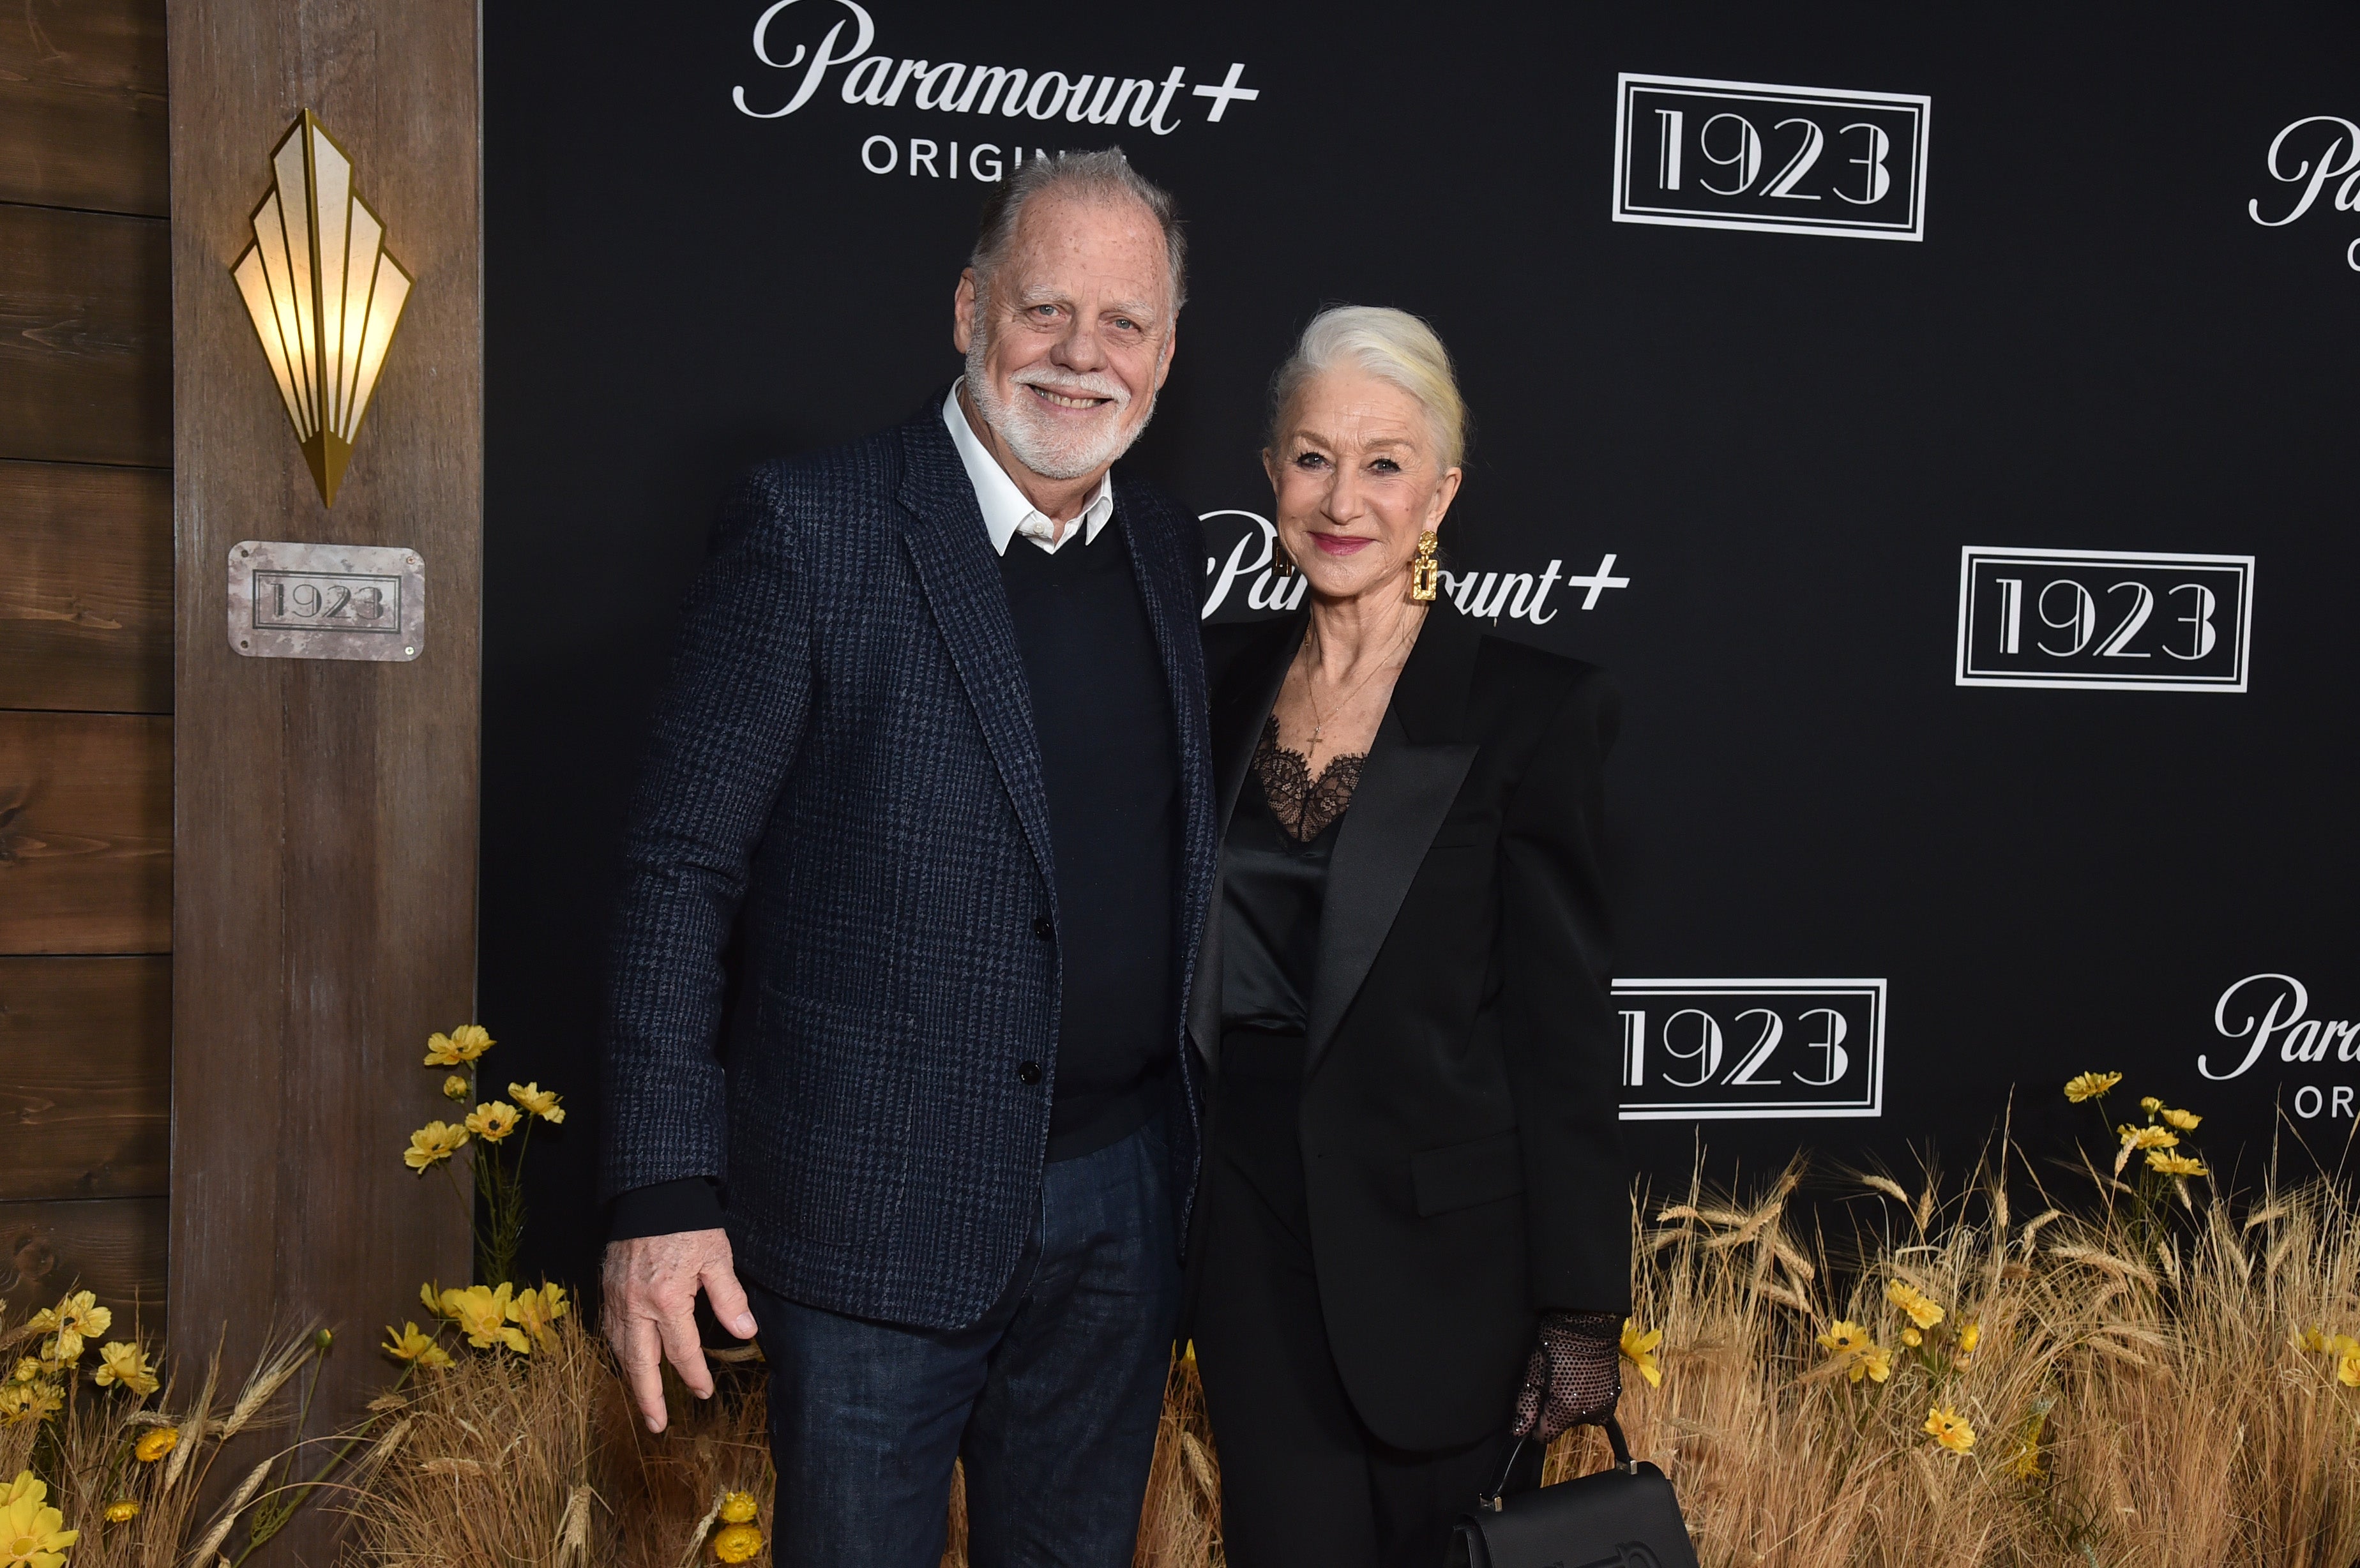 Taylor Hackford and Helen Mirren attends the "1923" LA Premiere Screening & After Party on December 02, 2022